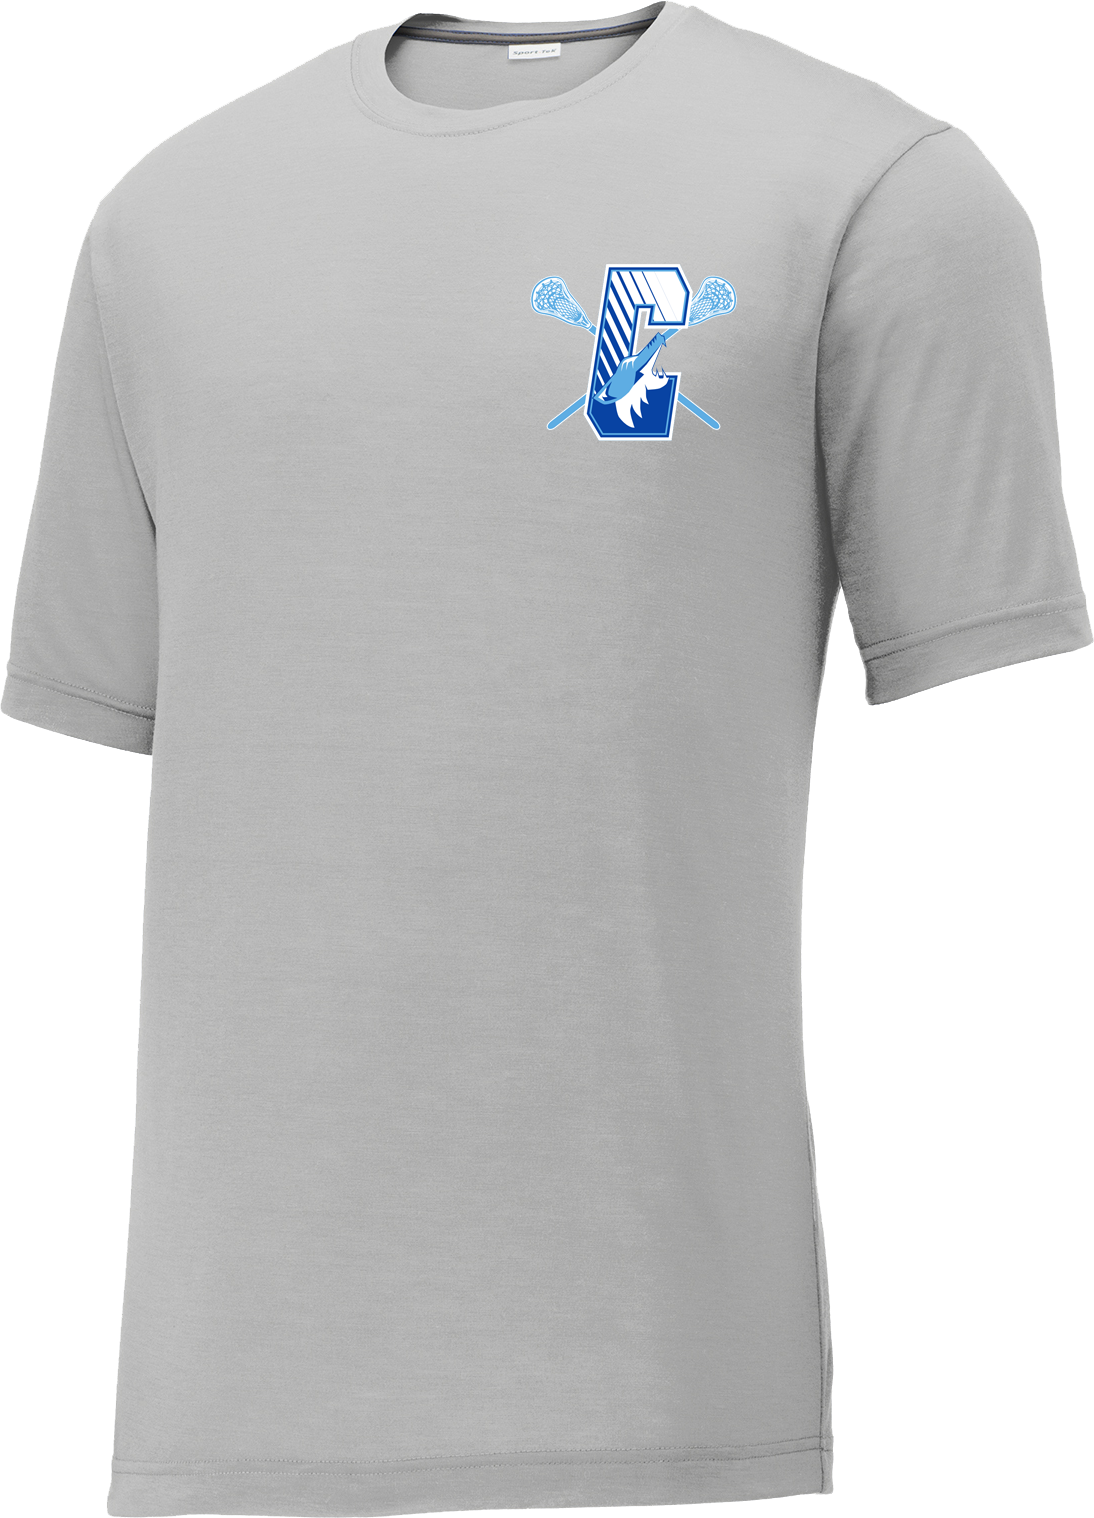 Coyotes Lacrosse Silver CottonTouch Performance T-Shirt